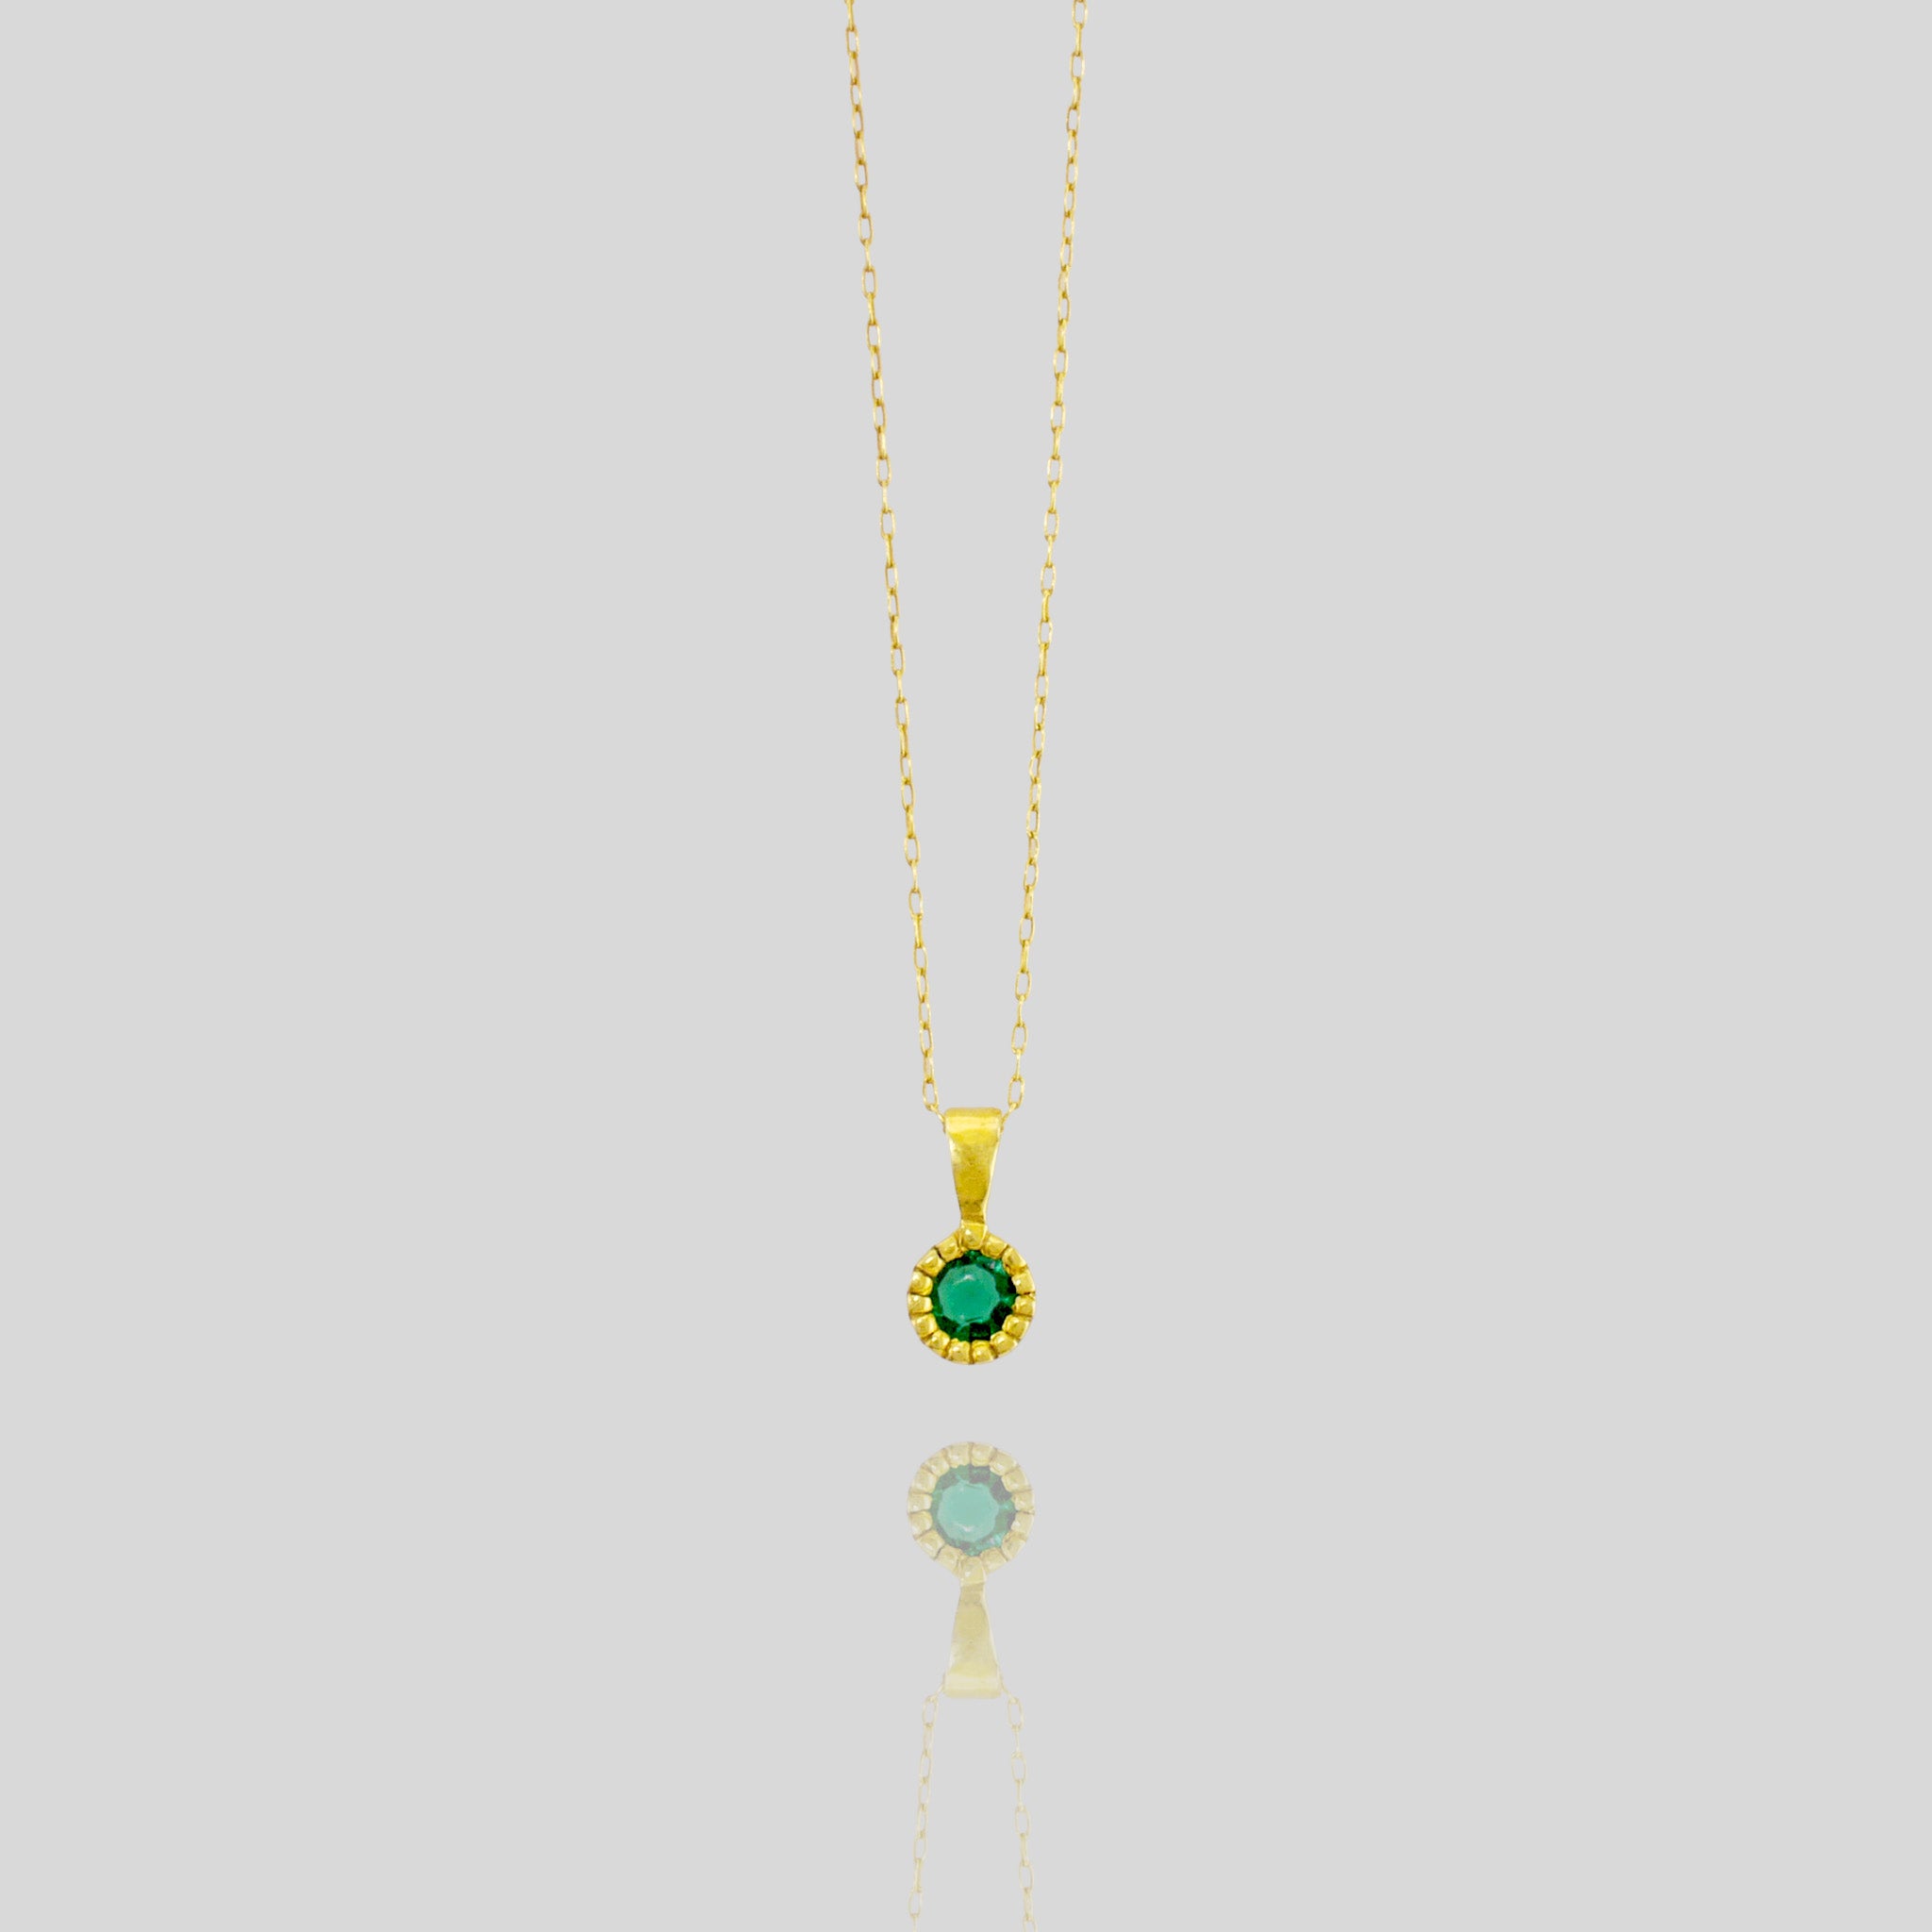 Elegant round gold pendant with embroidered texture and central Emerald, exuding classic sophistication.